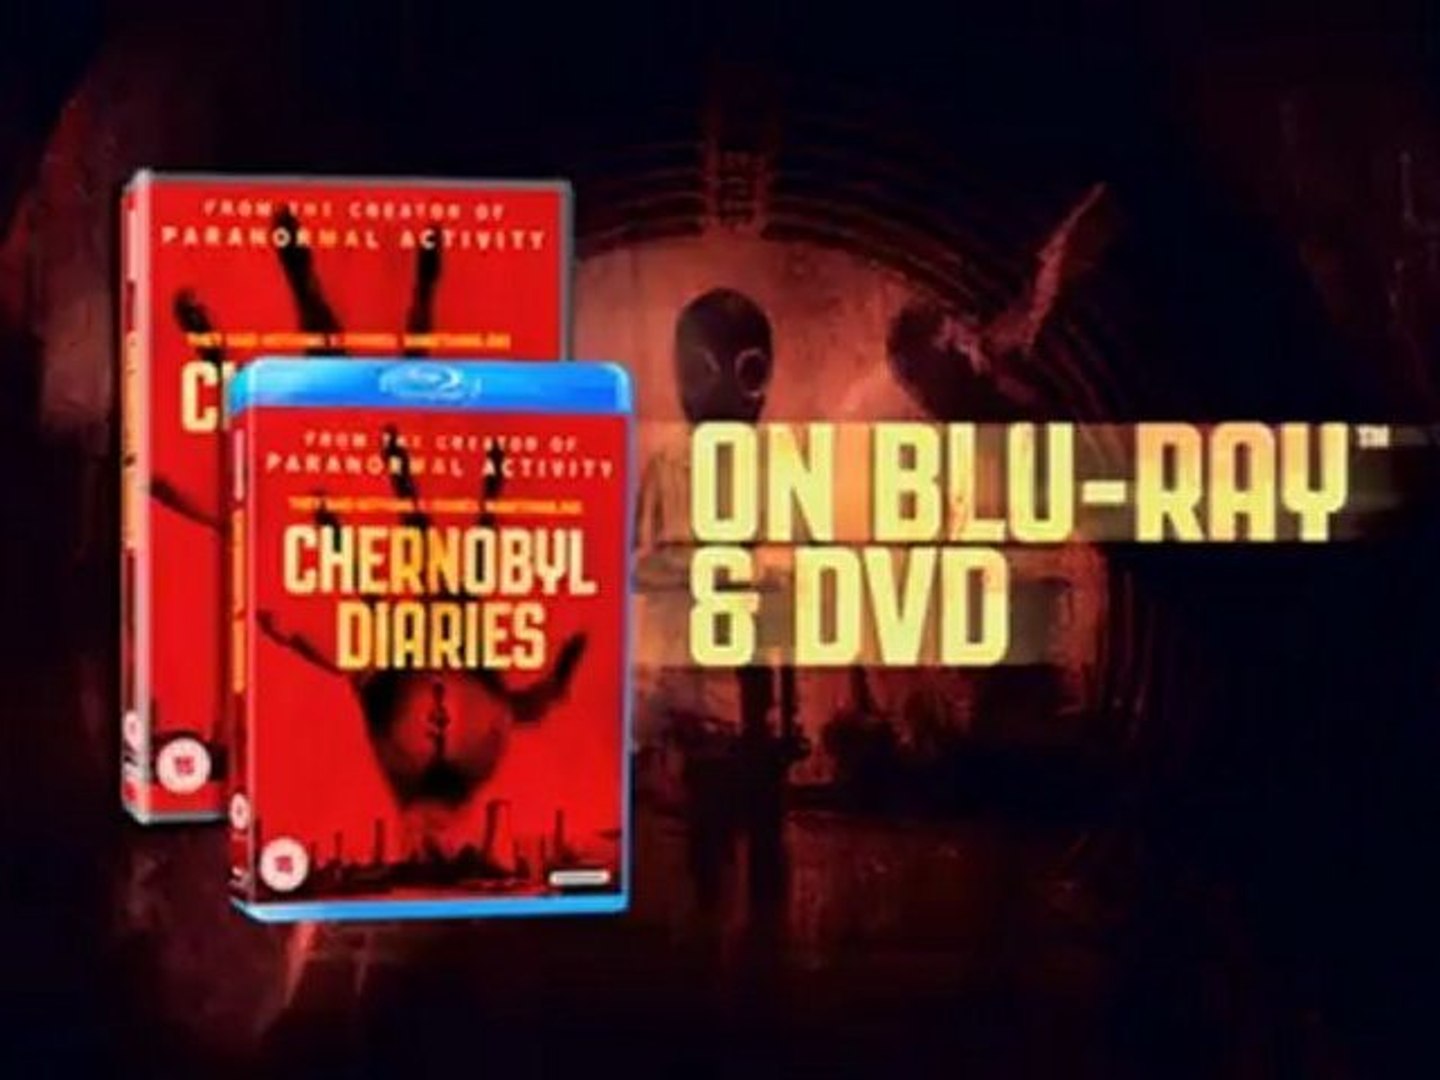 Chernobyl Diaries - DVD and Blu-ray TV Spot - Trailer - video Dailymotion